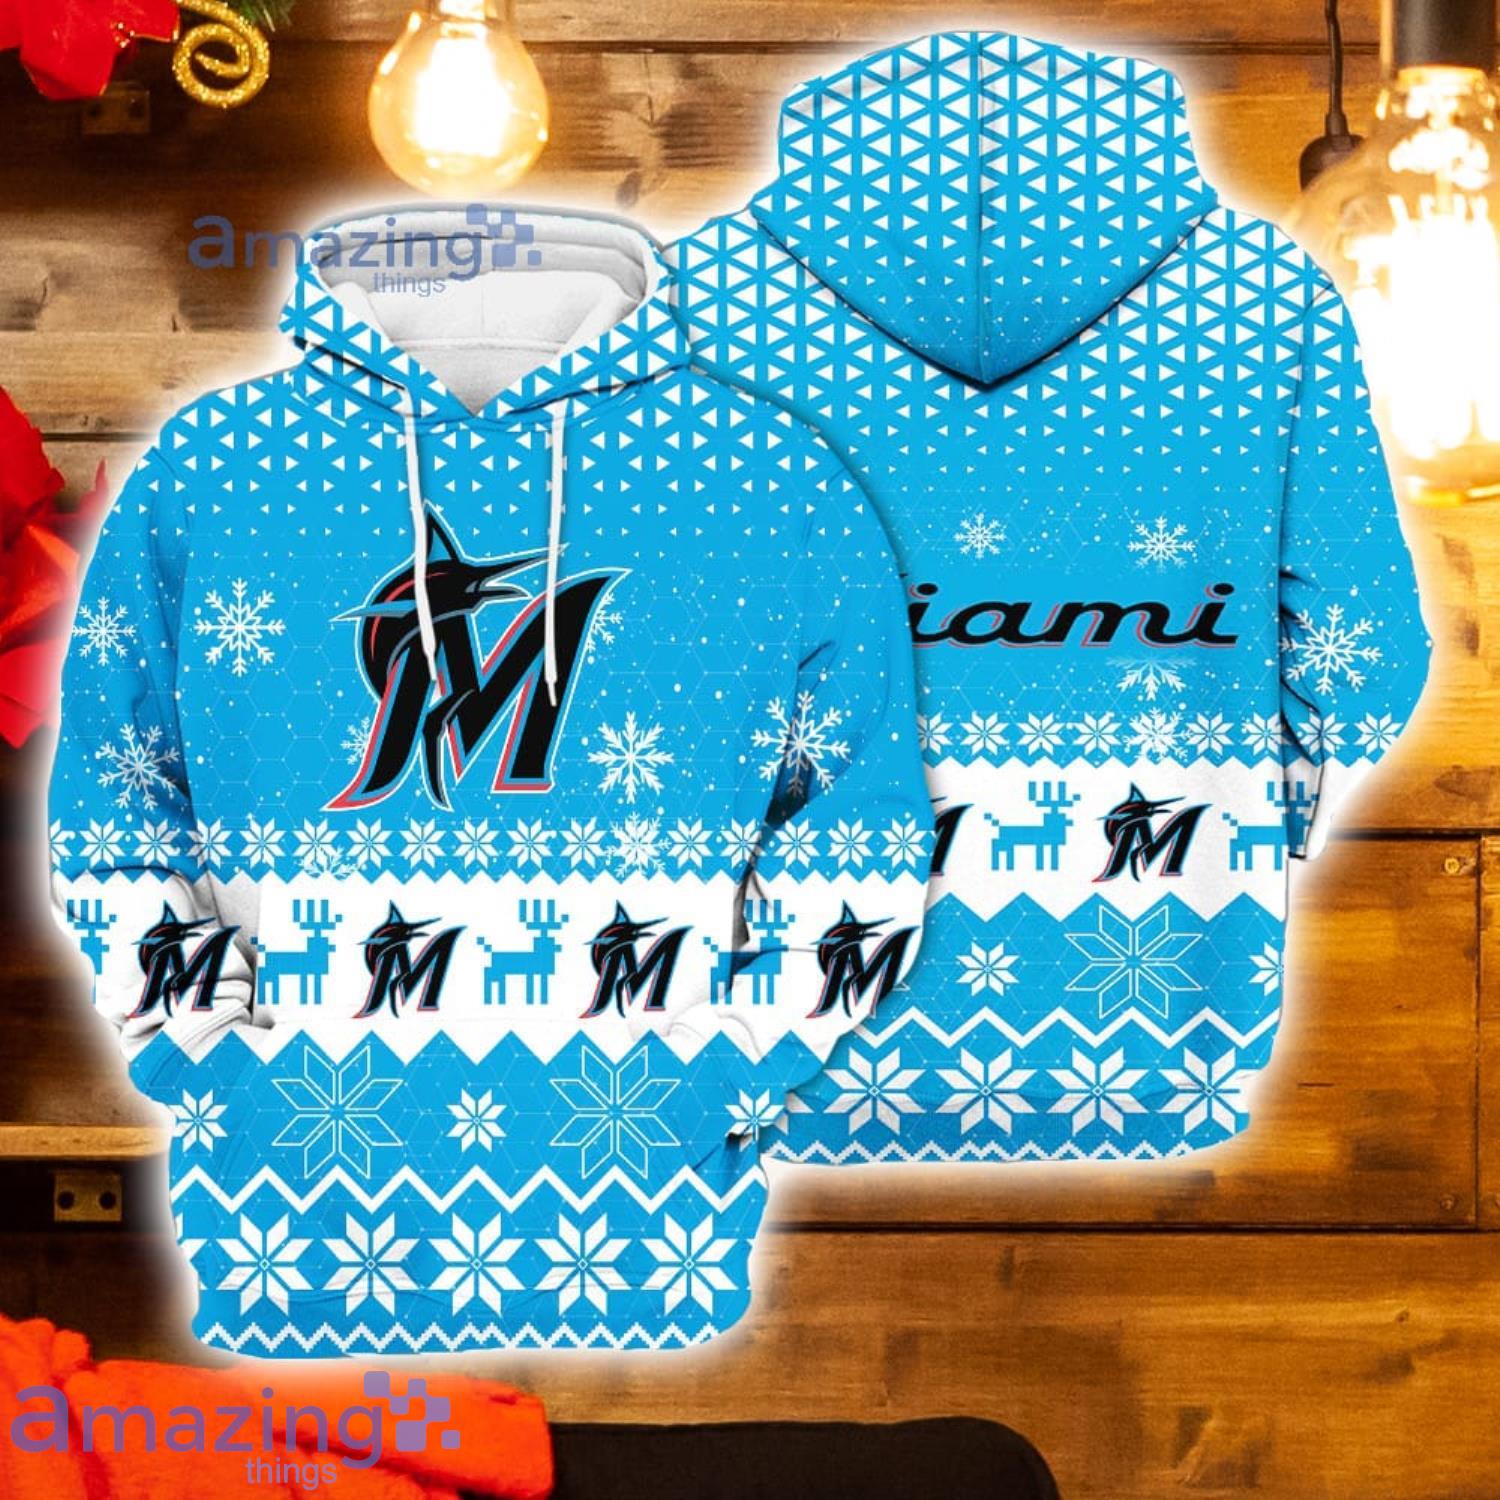 Miami Marlins All Over Printed 3D Hoodie New Design - T-shirts Low Price